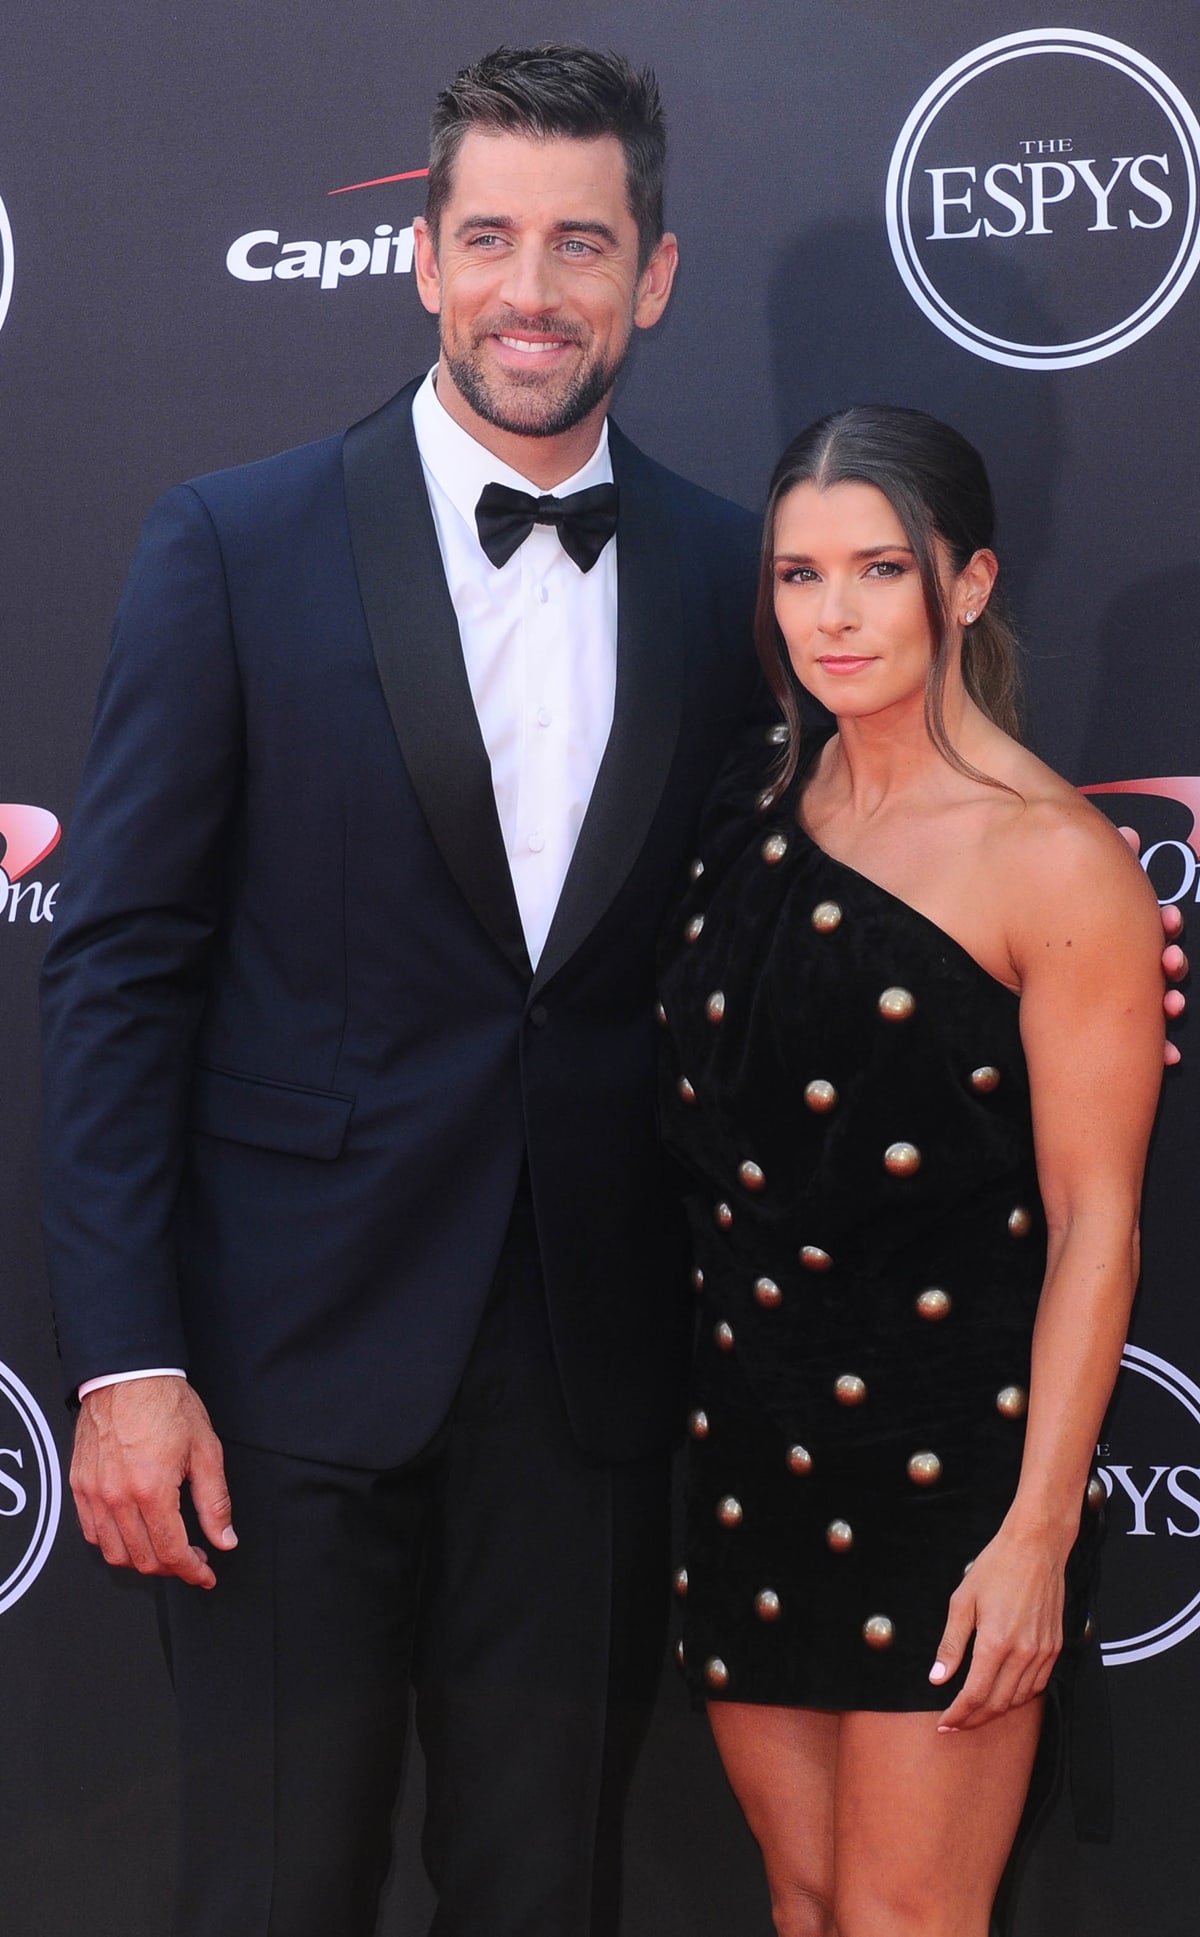 Aaron Rodgers and Danica Patrick started dating after meeting at the 2012 ESPY Awards